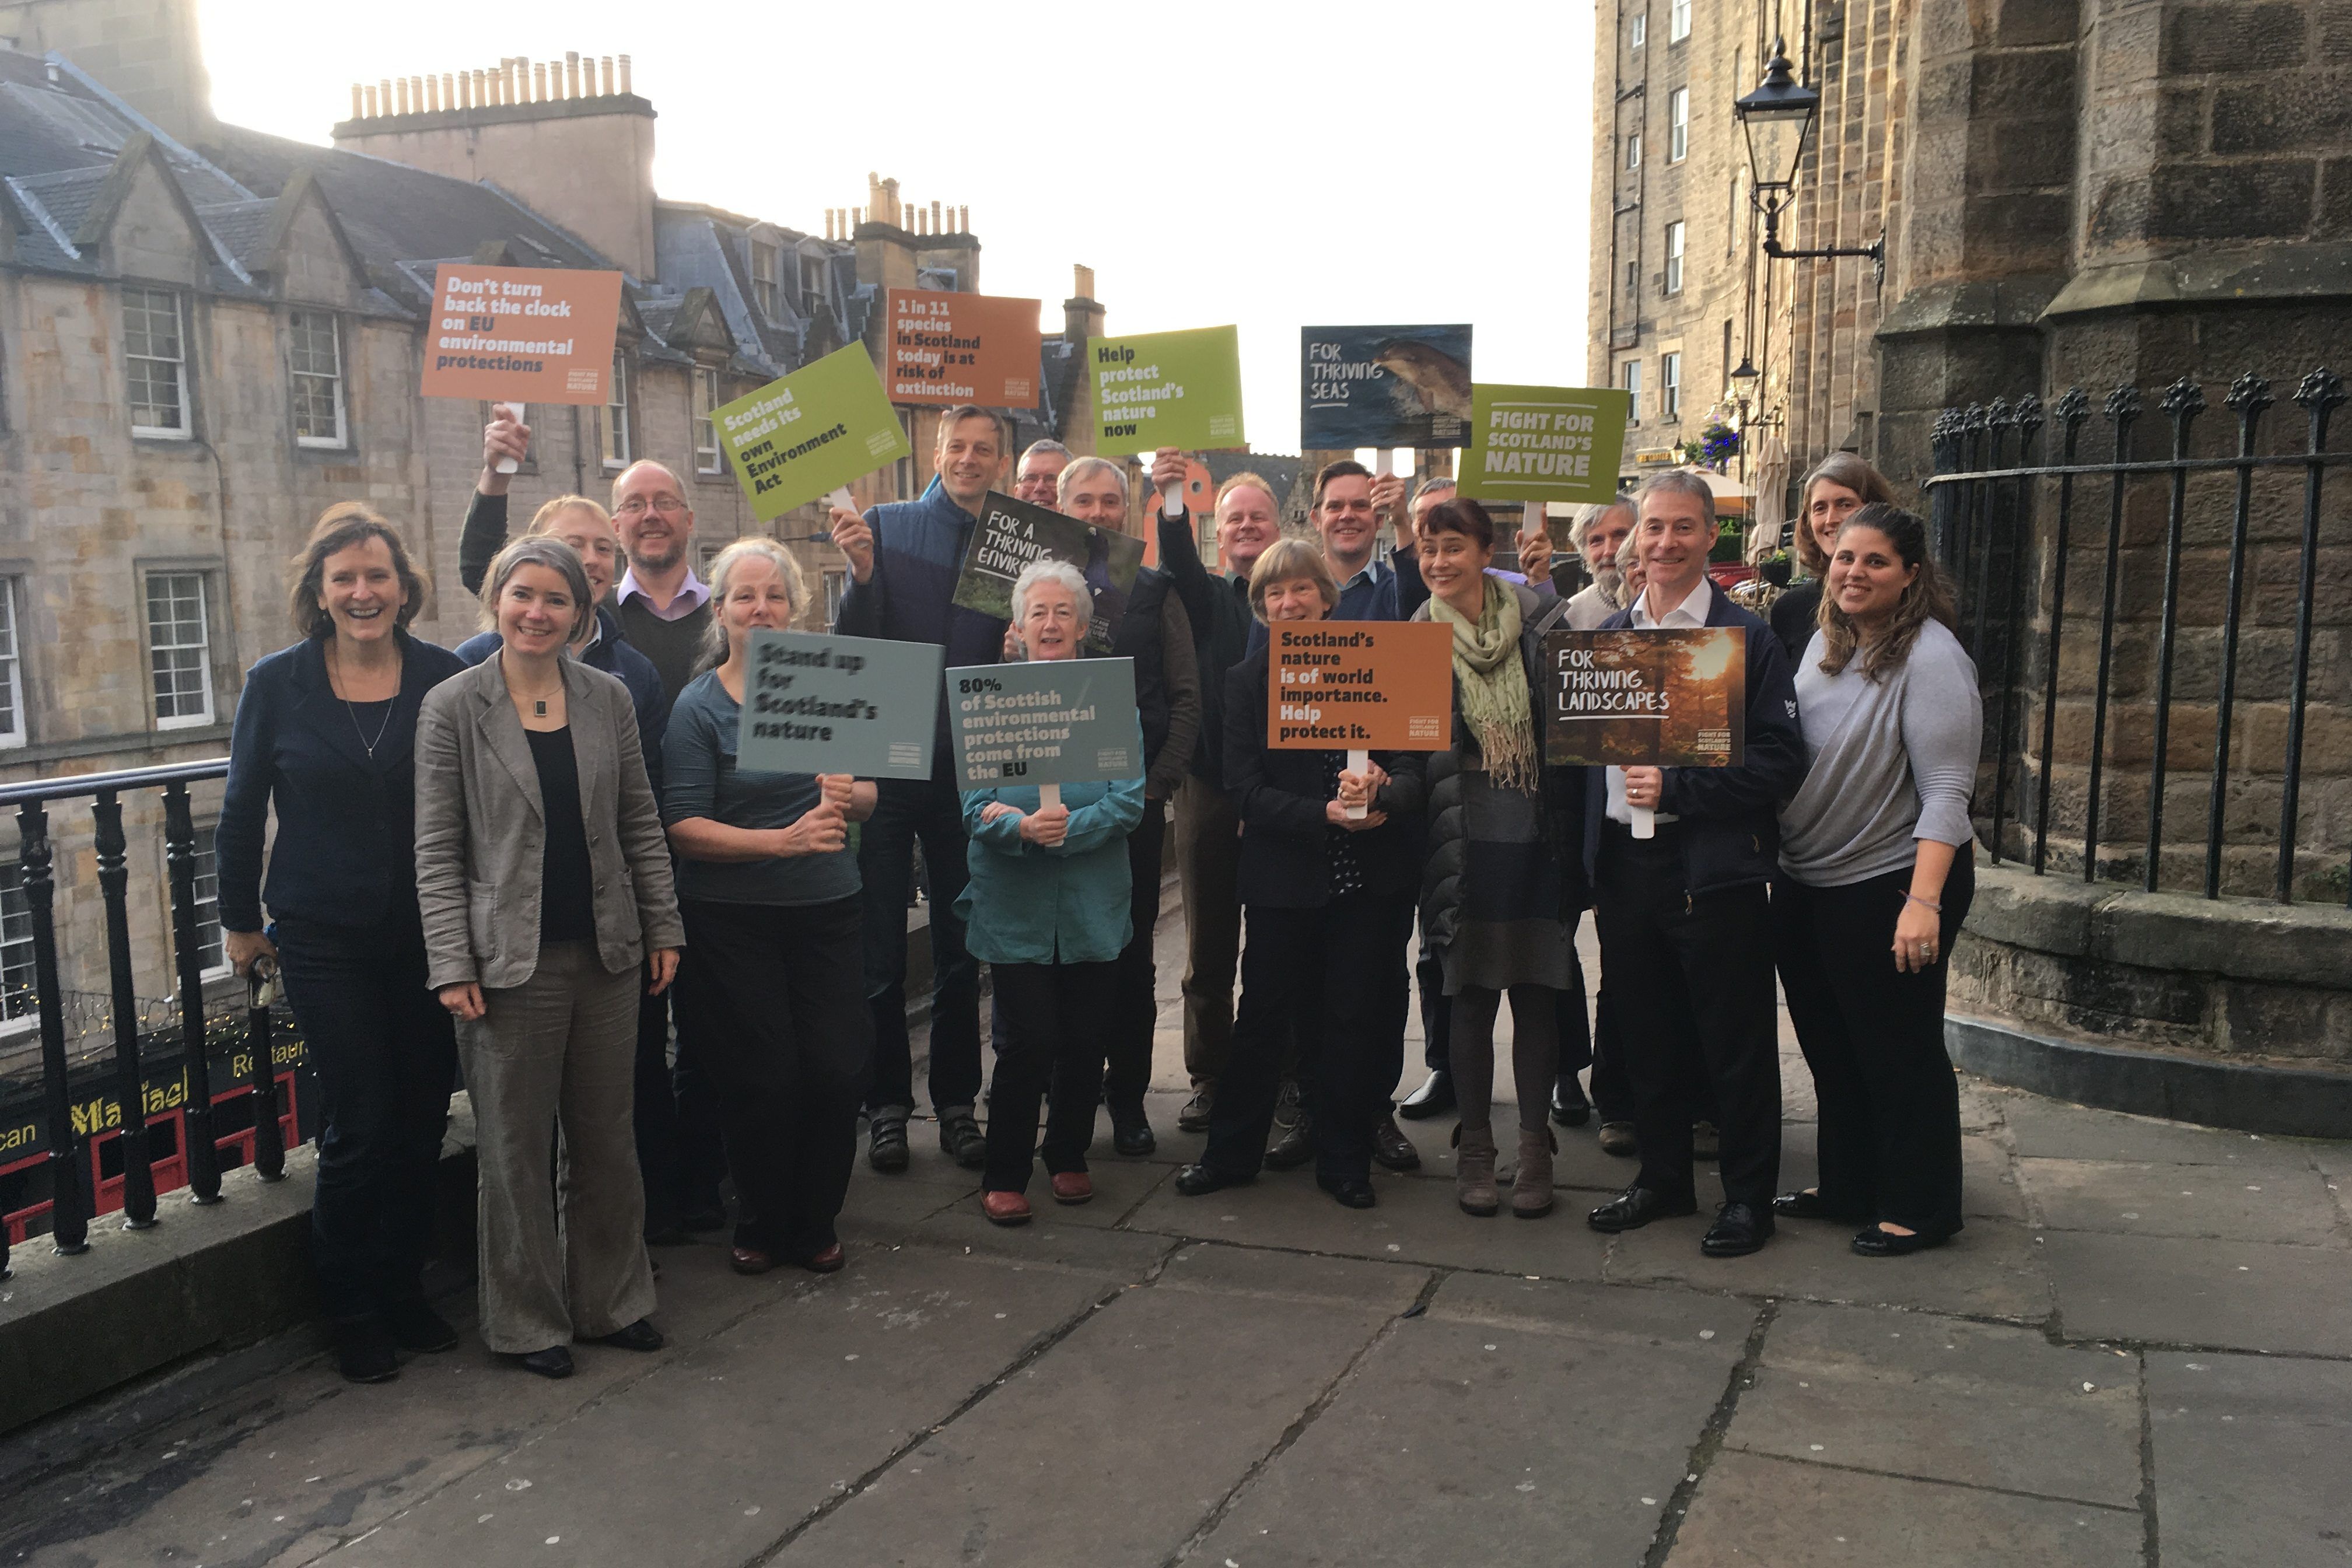 Scotlink staff and campaigners outside in Edinburgh holding campaign banners.